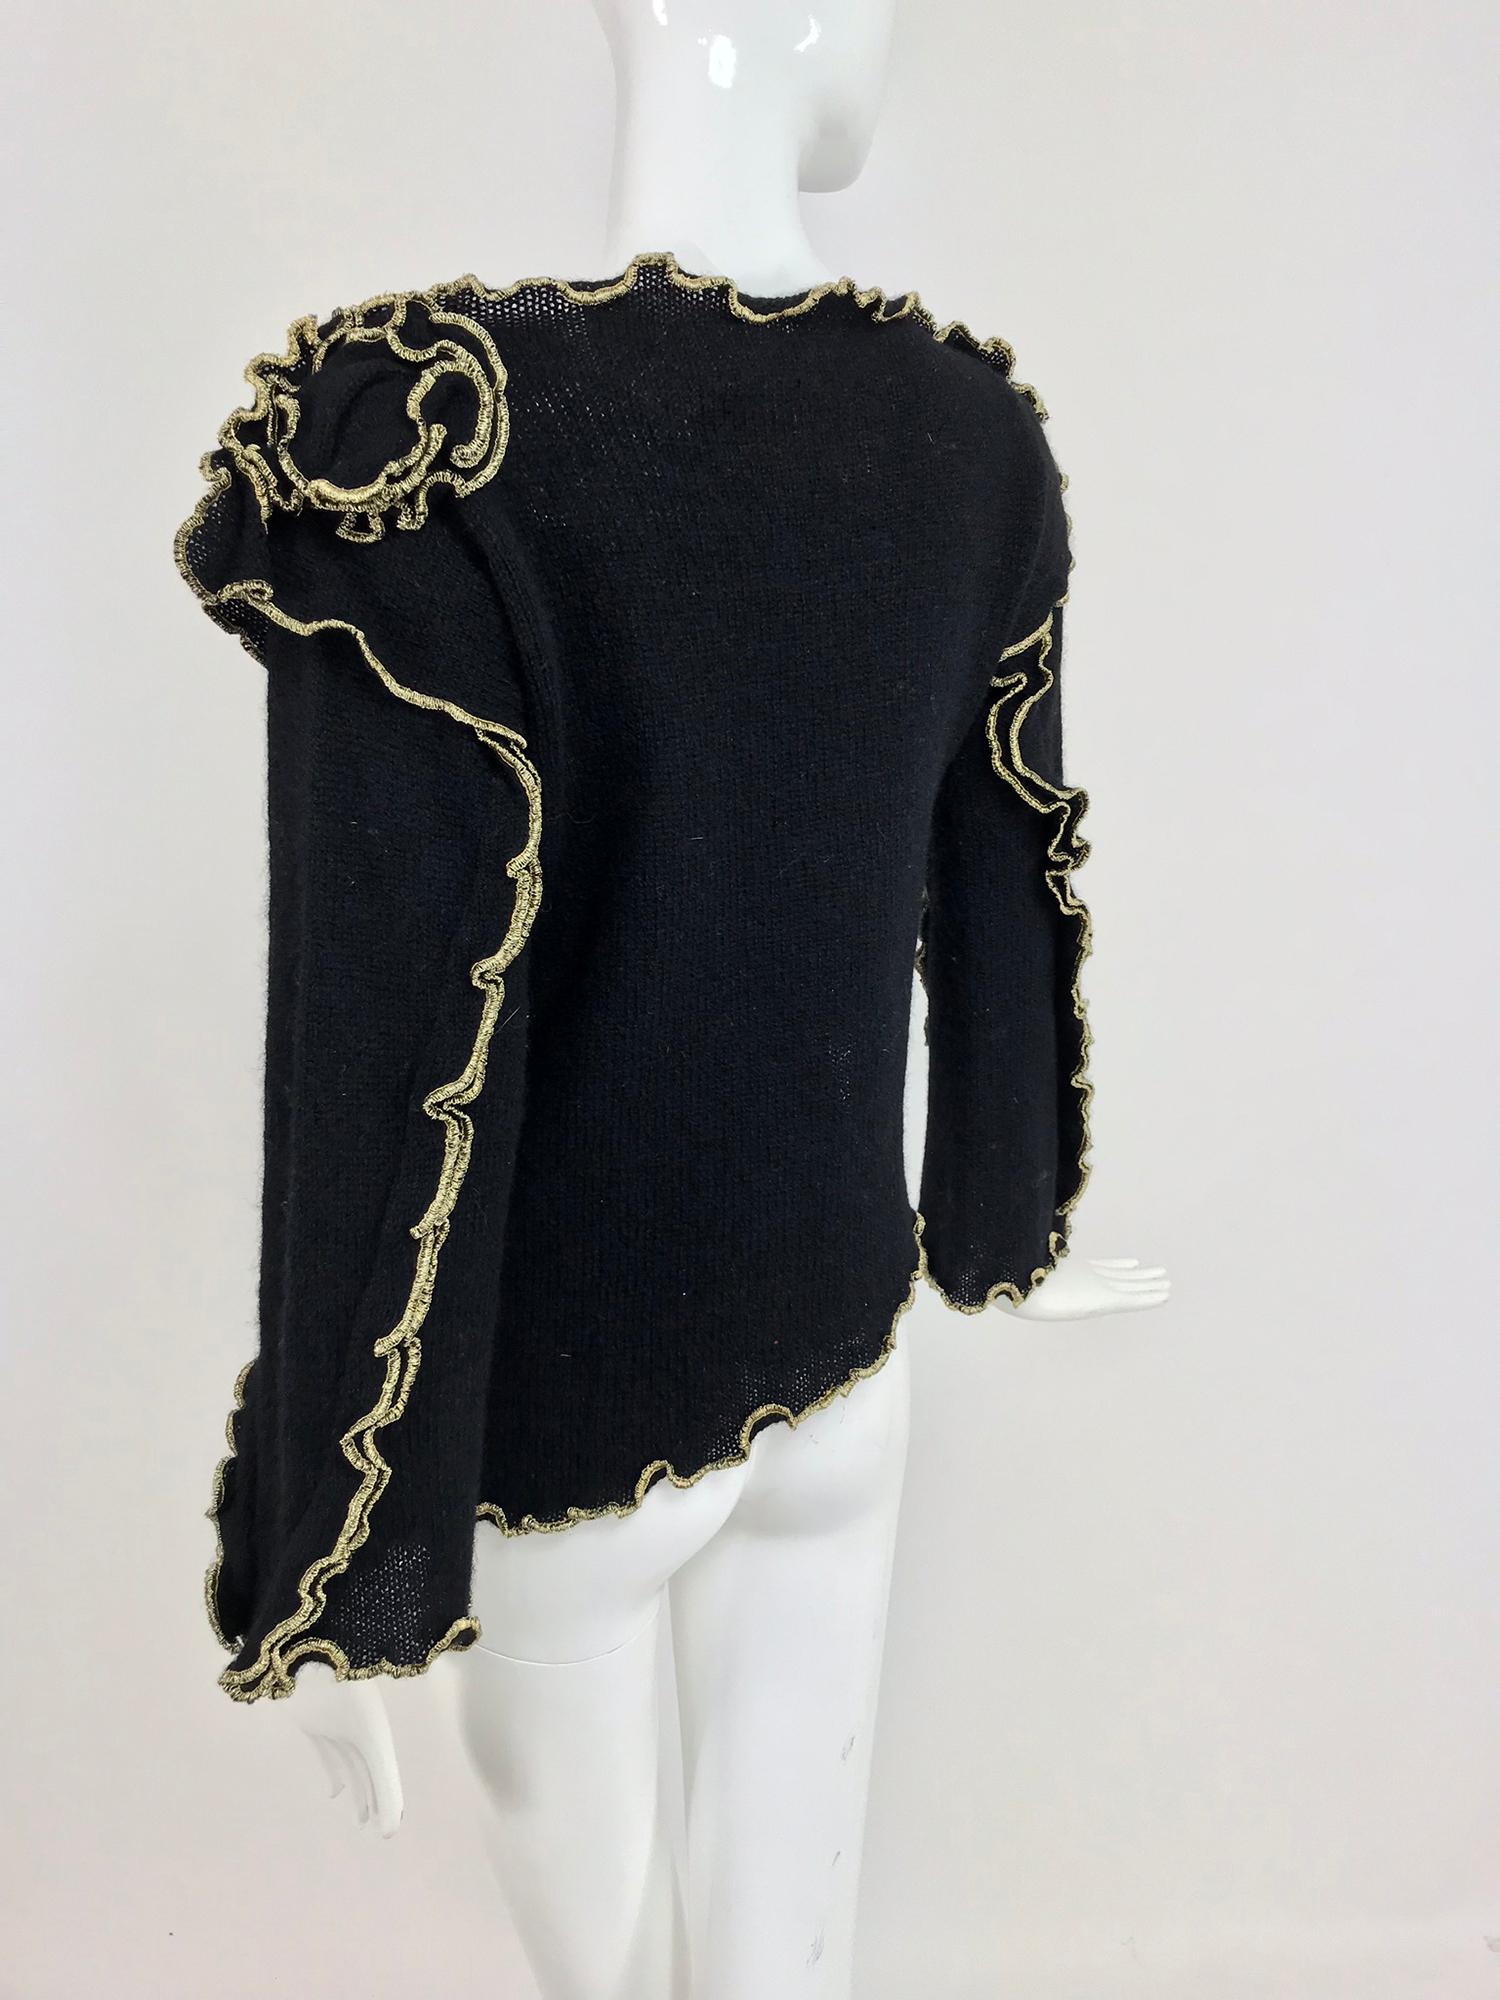 Leigh Westbrook Black Knit Gold Trim Floral Applique Sweater 1980s 4